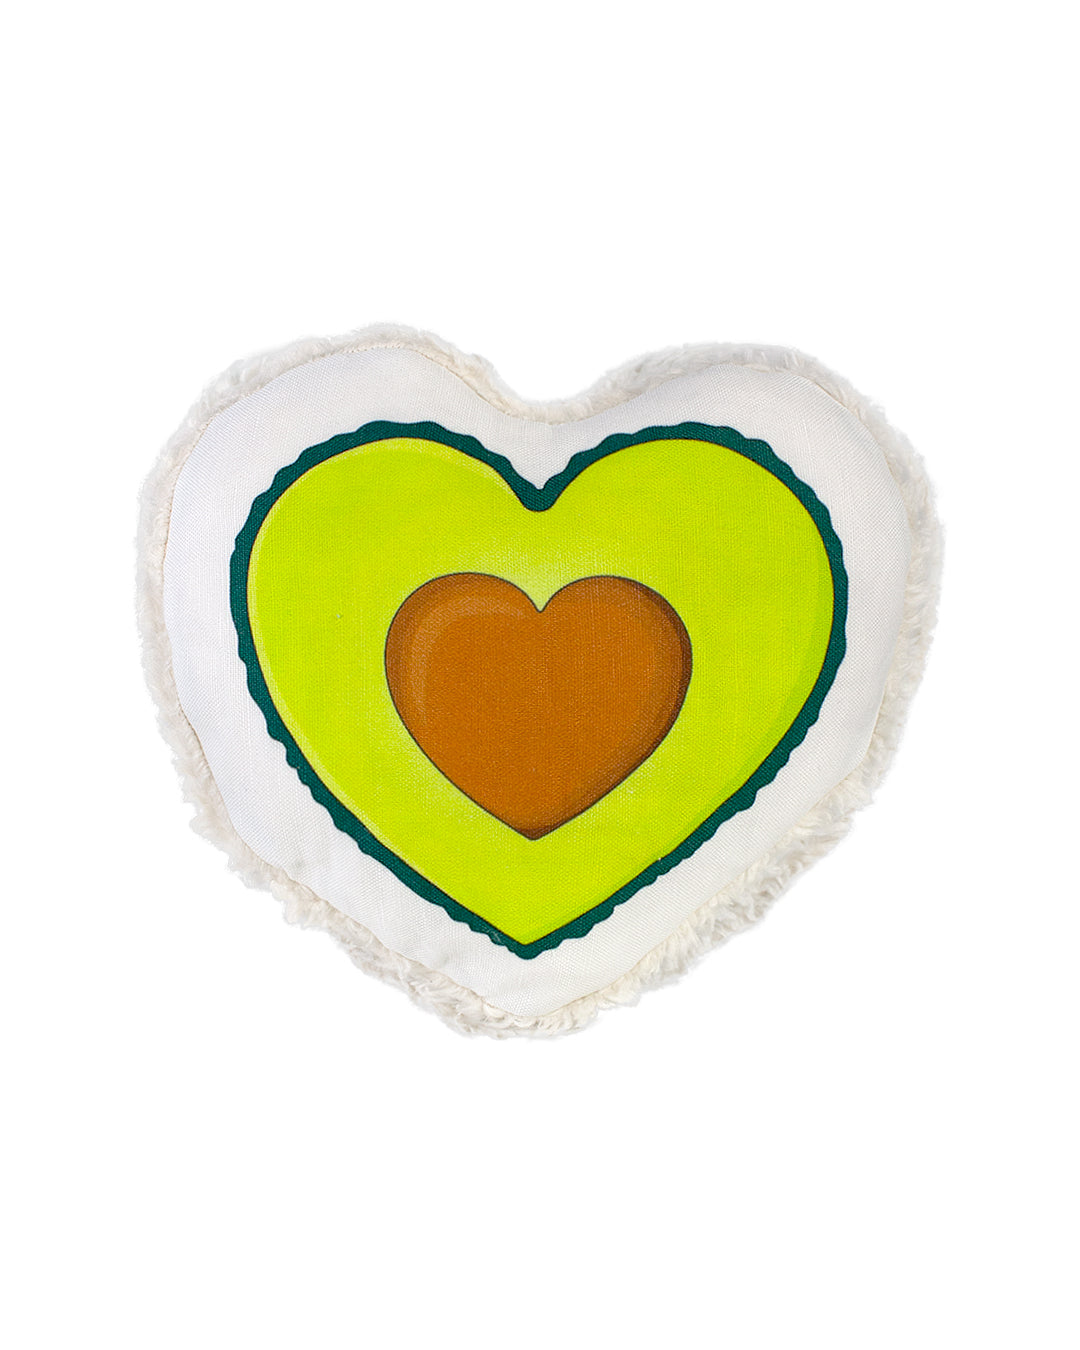 Eco-friendly dog toy shaped like an avocado that’s in the shape of a heart. Made with durable canvas and plush cotton sherpa. All materials are non-toxic and vegan-friendly. 